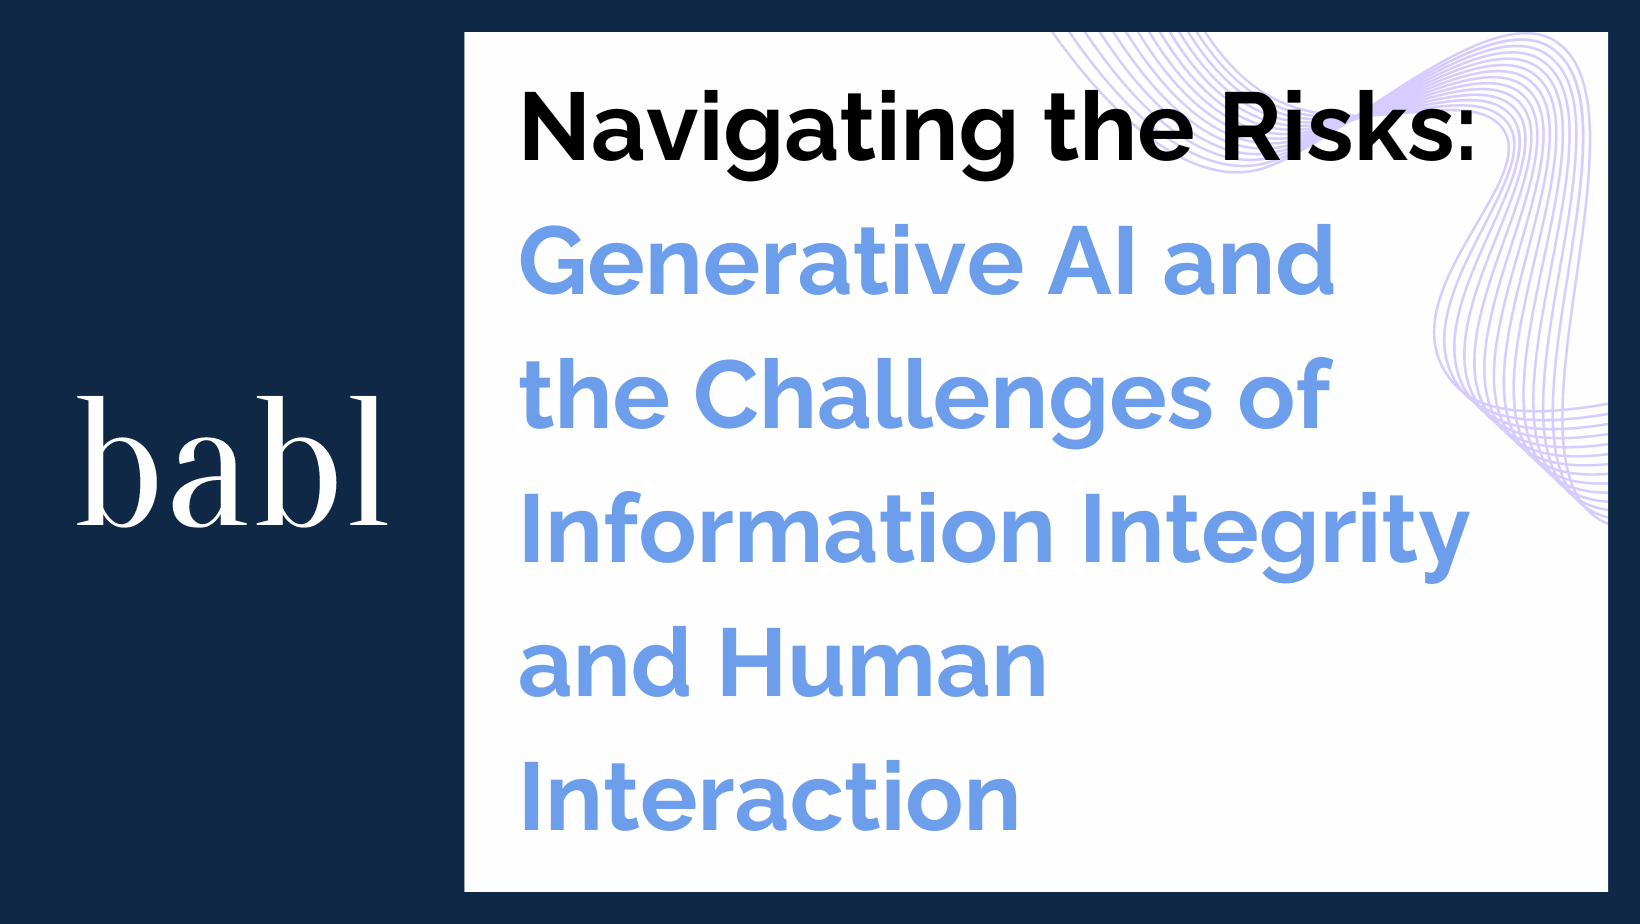 Navigating the Risks: Generative AI and the Challenges of Information Integrity and Human Interaction